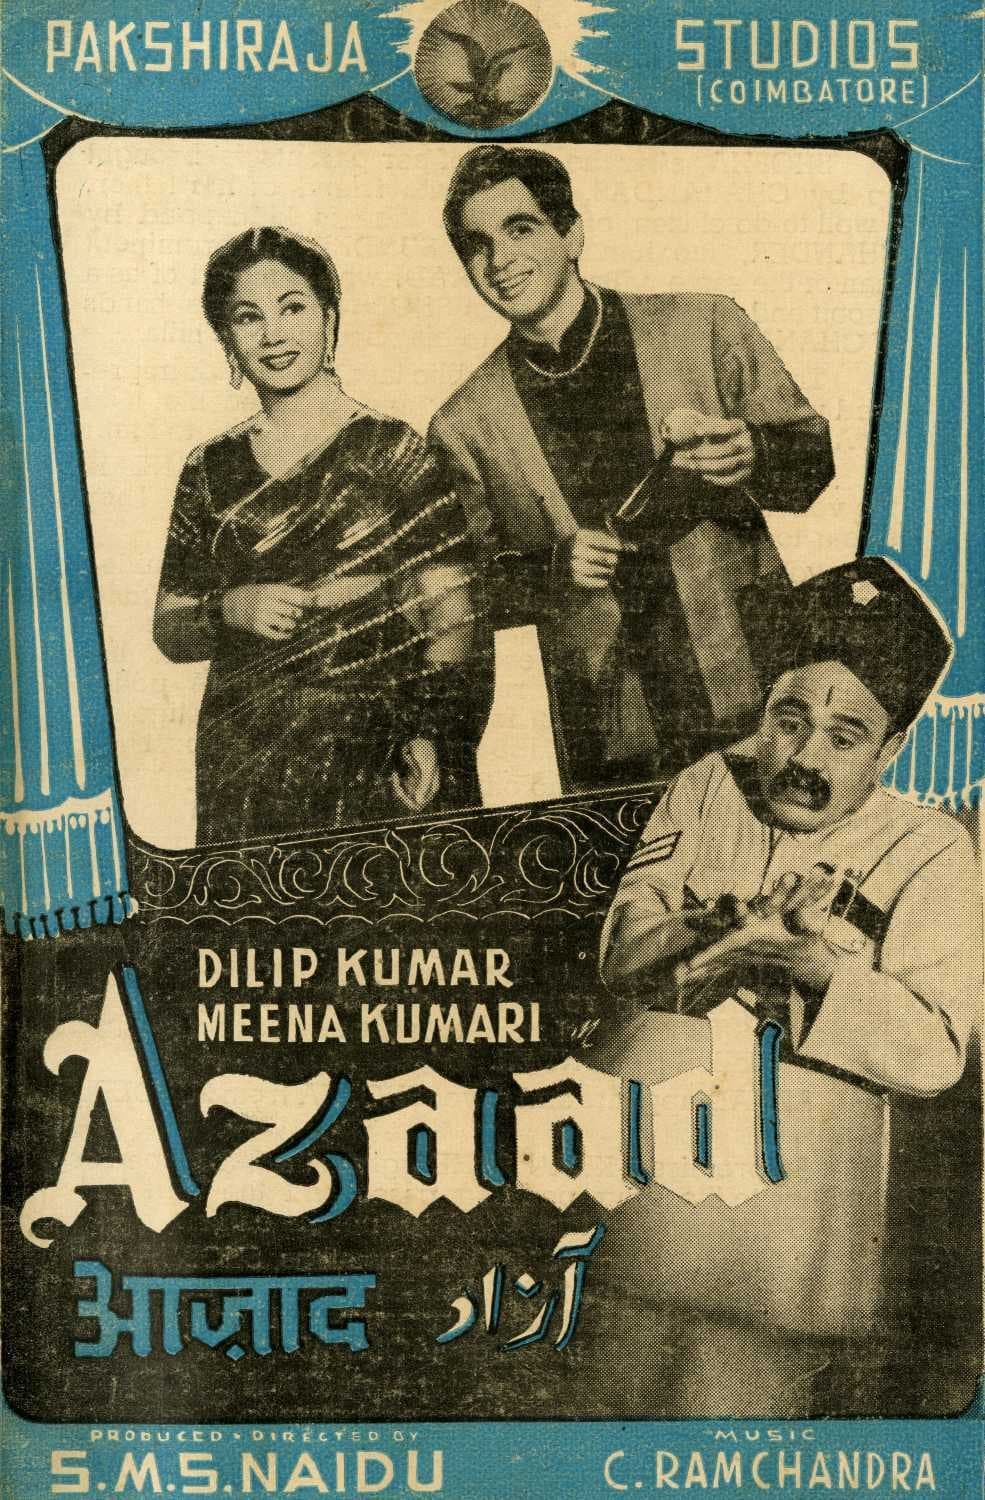 Poster for the movie "Azaad"